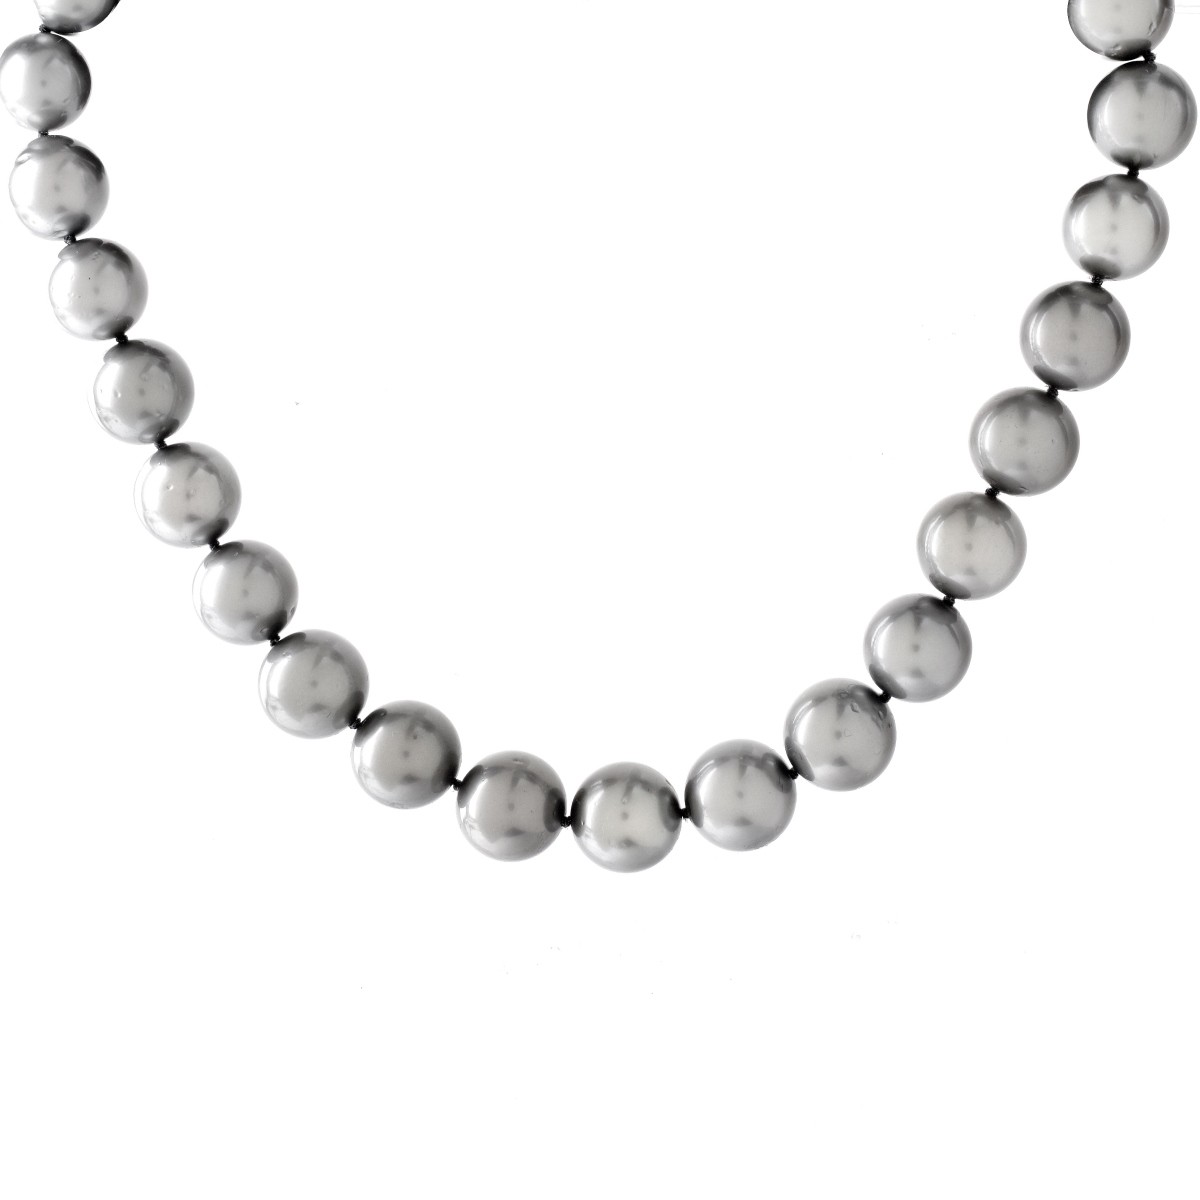 11.5-14.0mm Tahitian Gray Pearl Necklace - Image 2 of 6